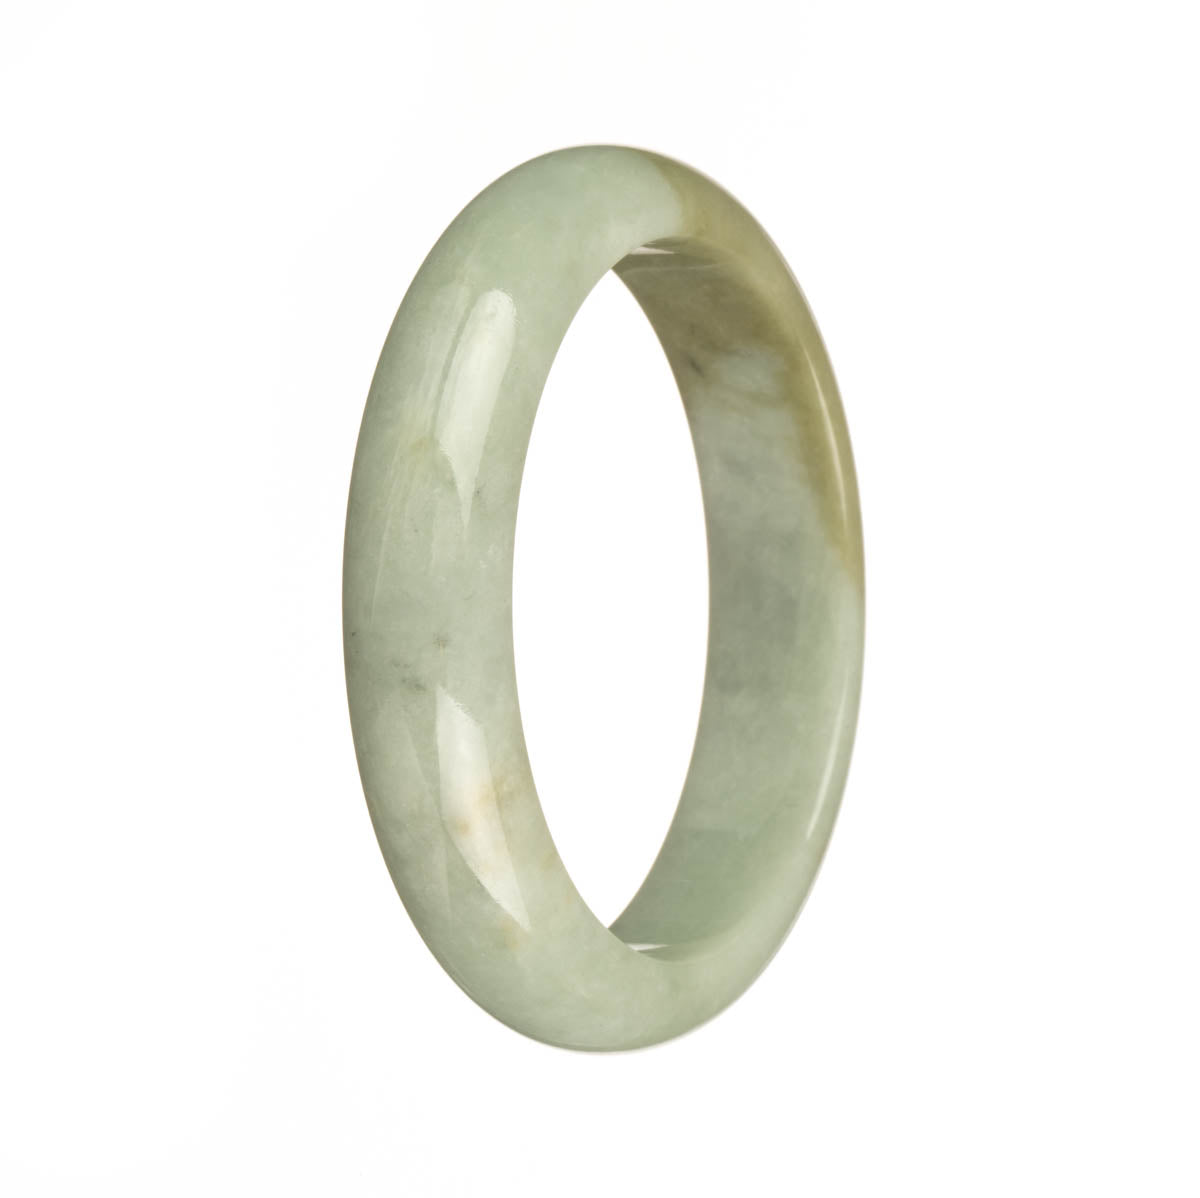 Close-up of a traditional jade bracelet made of genuine Type A green jade. The bracelet features a half moon shape and is adorned with olive green patches. A luxurious and timeless accessory by MAYS™.